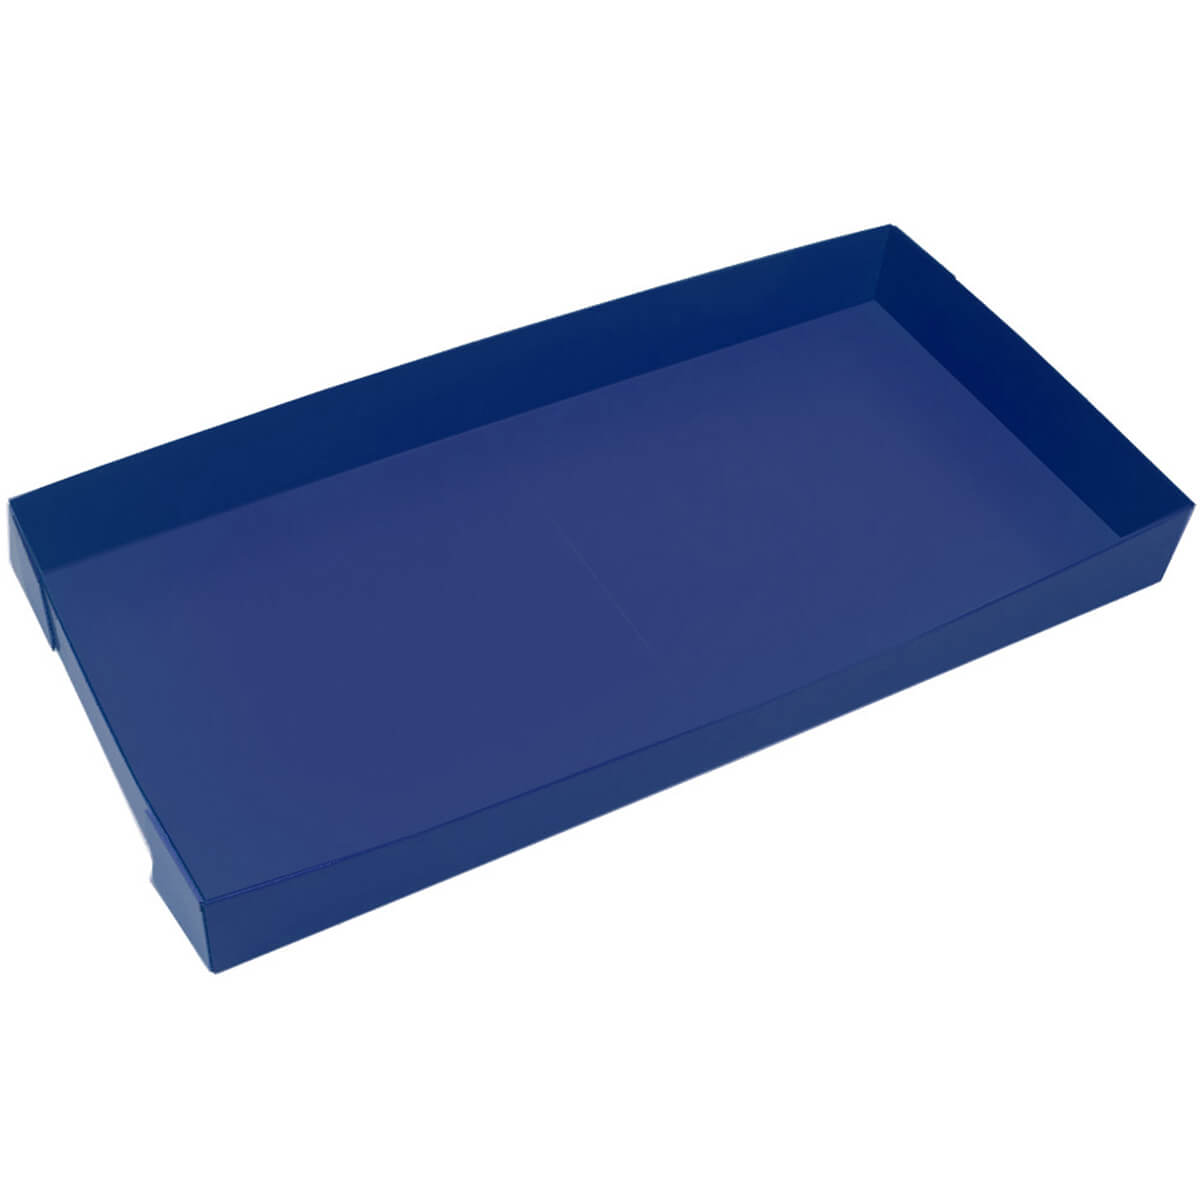 coroplast tray for guinea pig cage